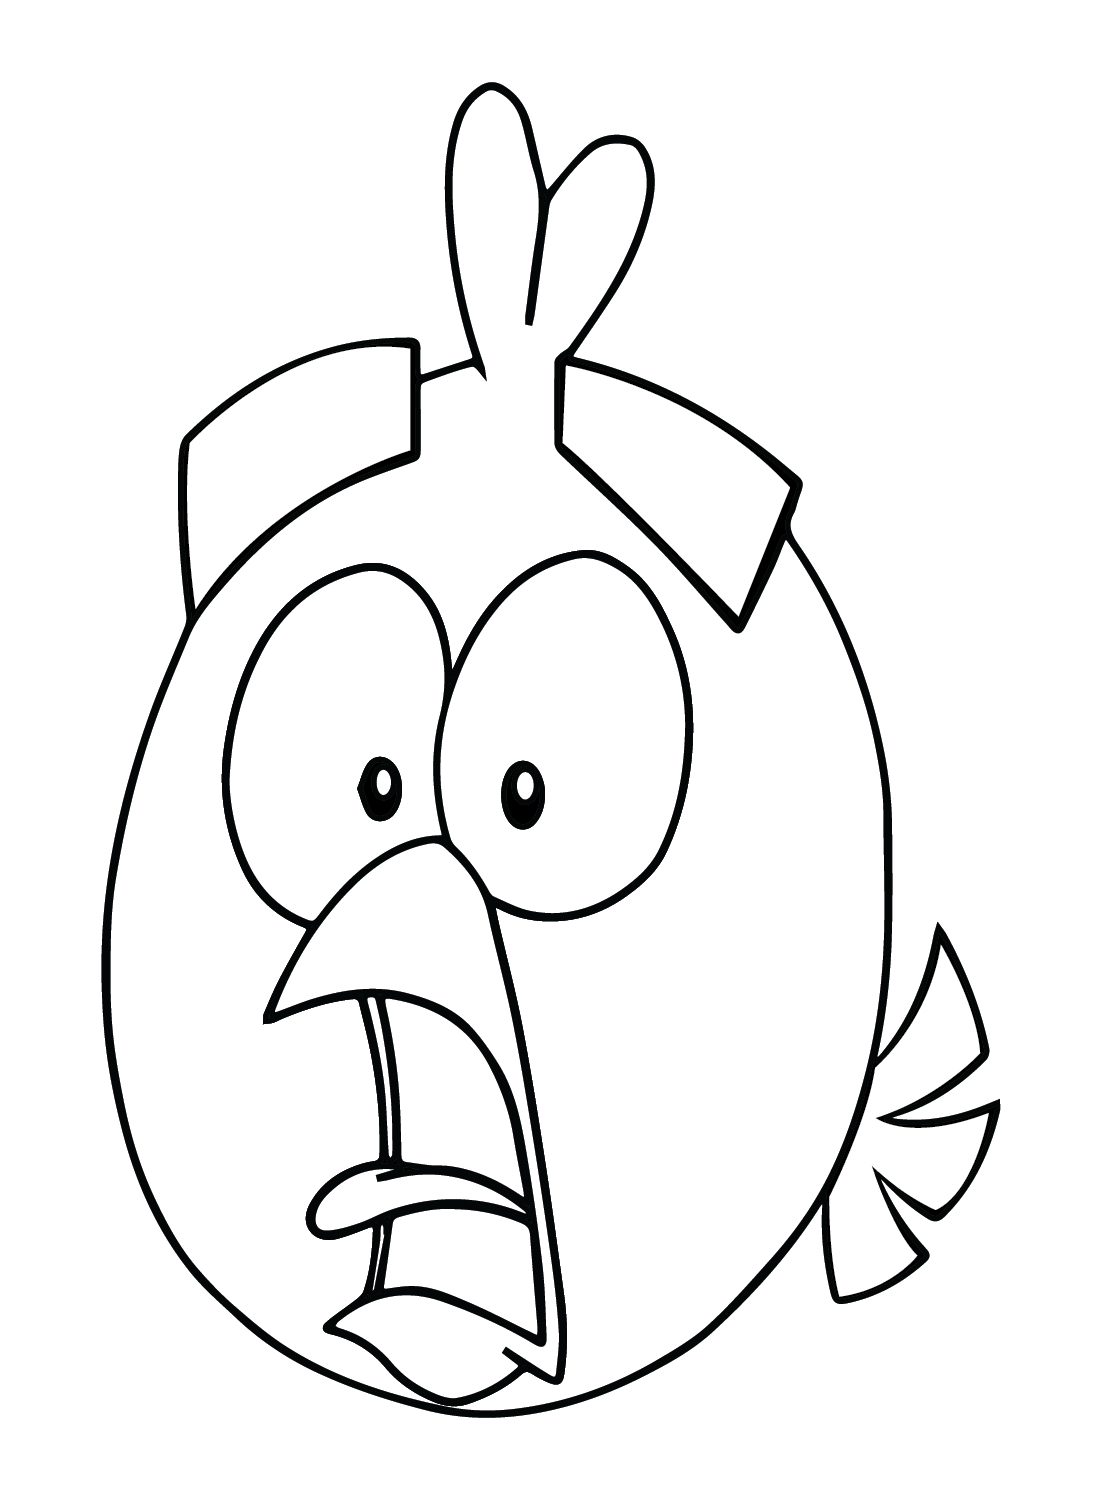 Funny Red (Angry Bird) Coloring Page